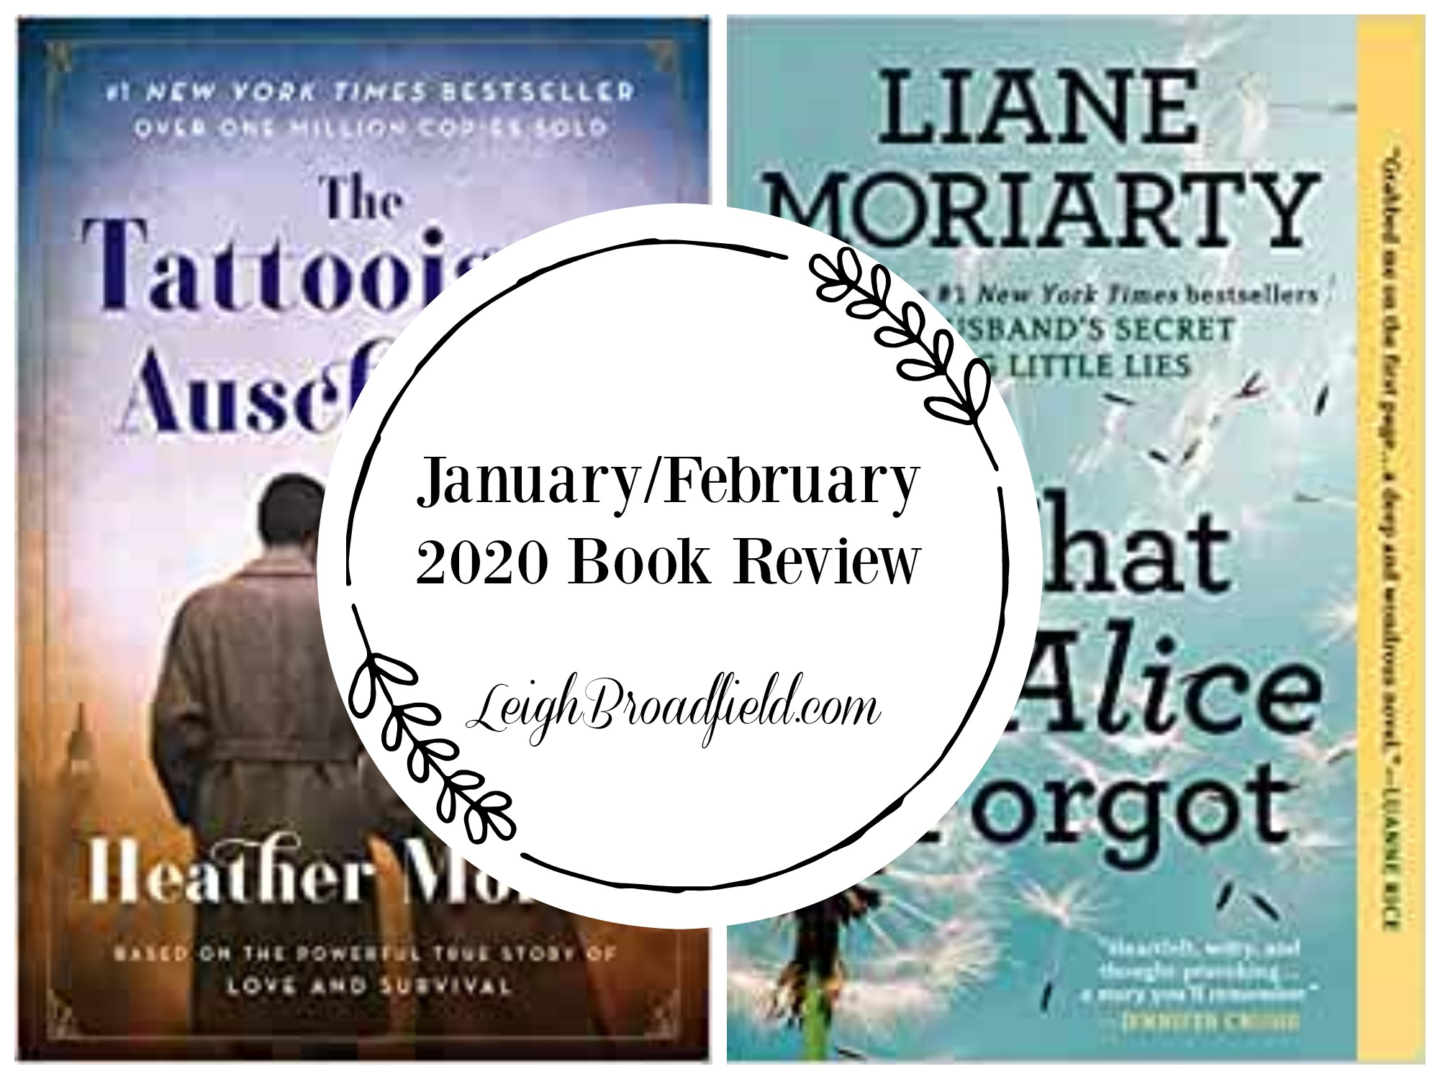 January/February Book Review